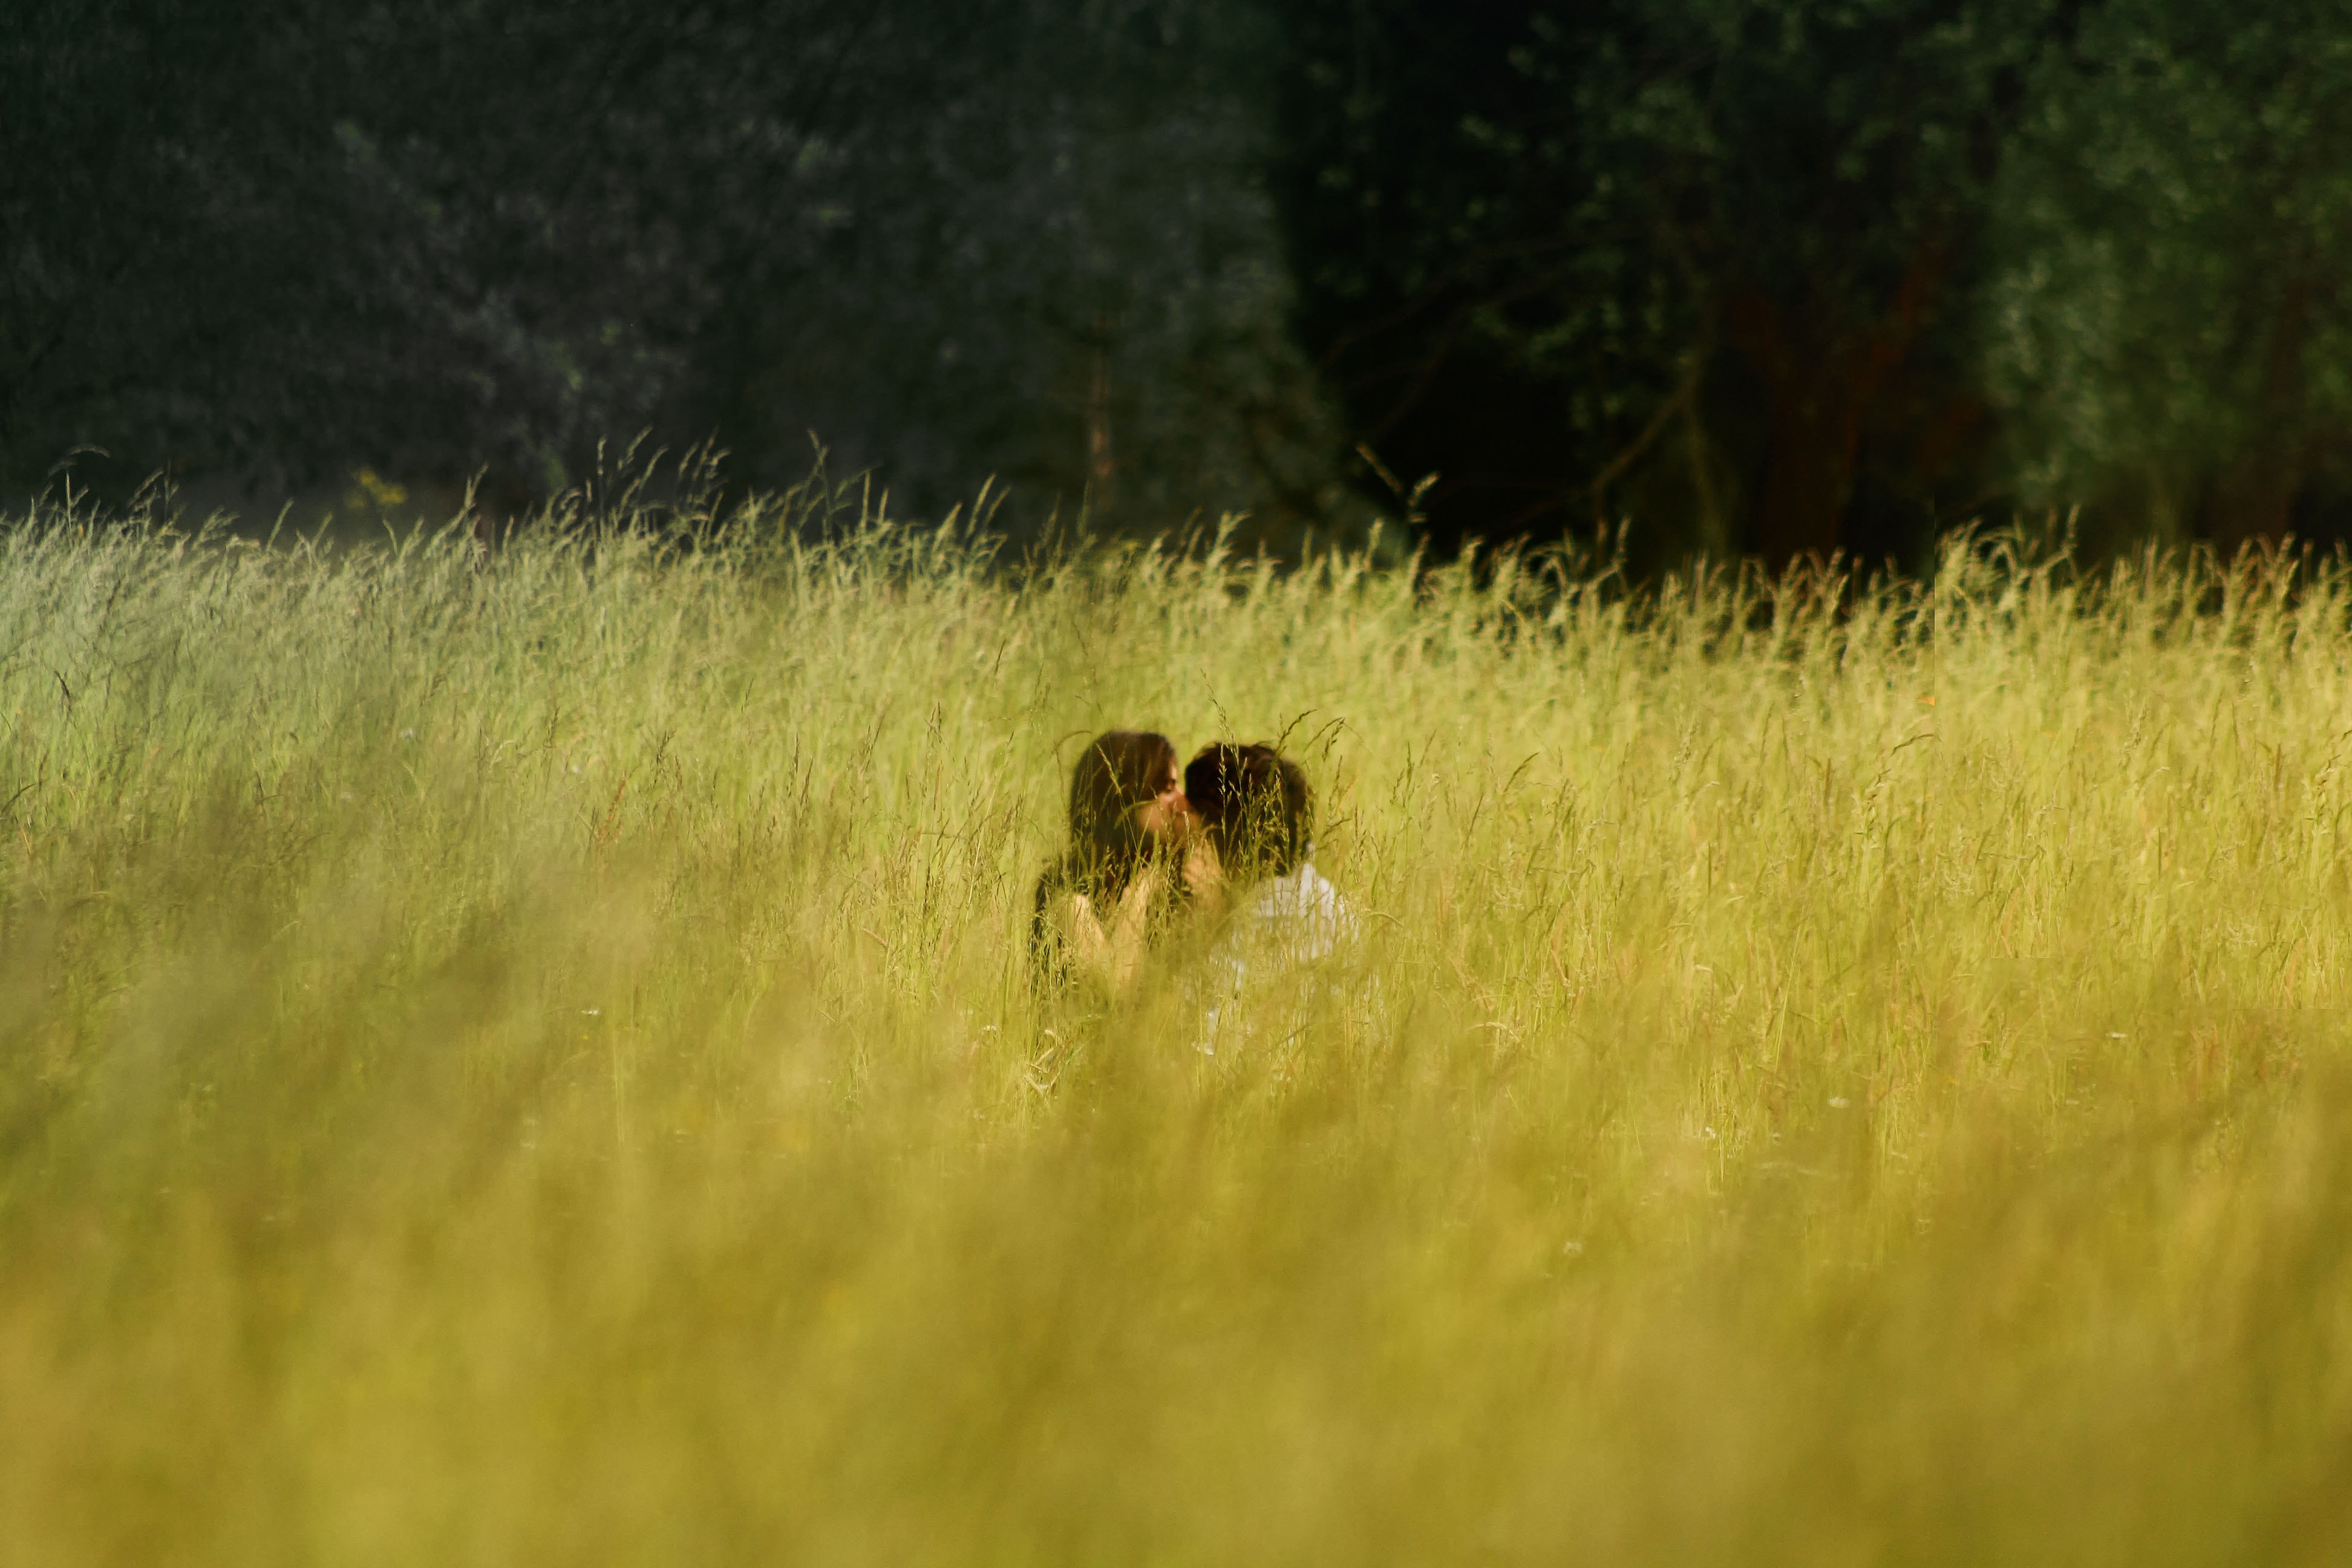 Two Romantic Couple In Field Wallpapers